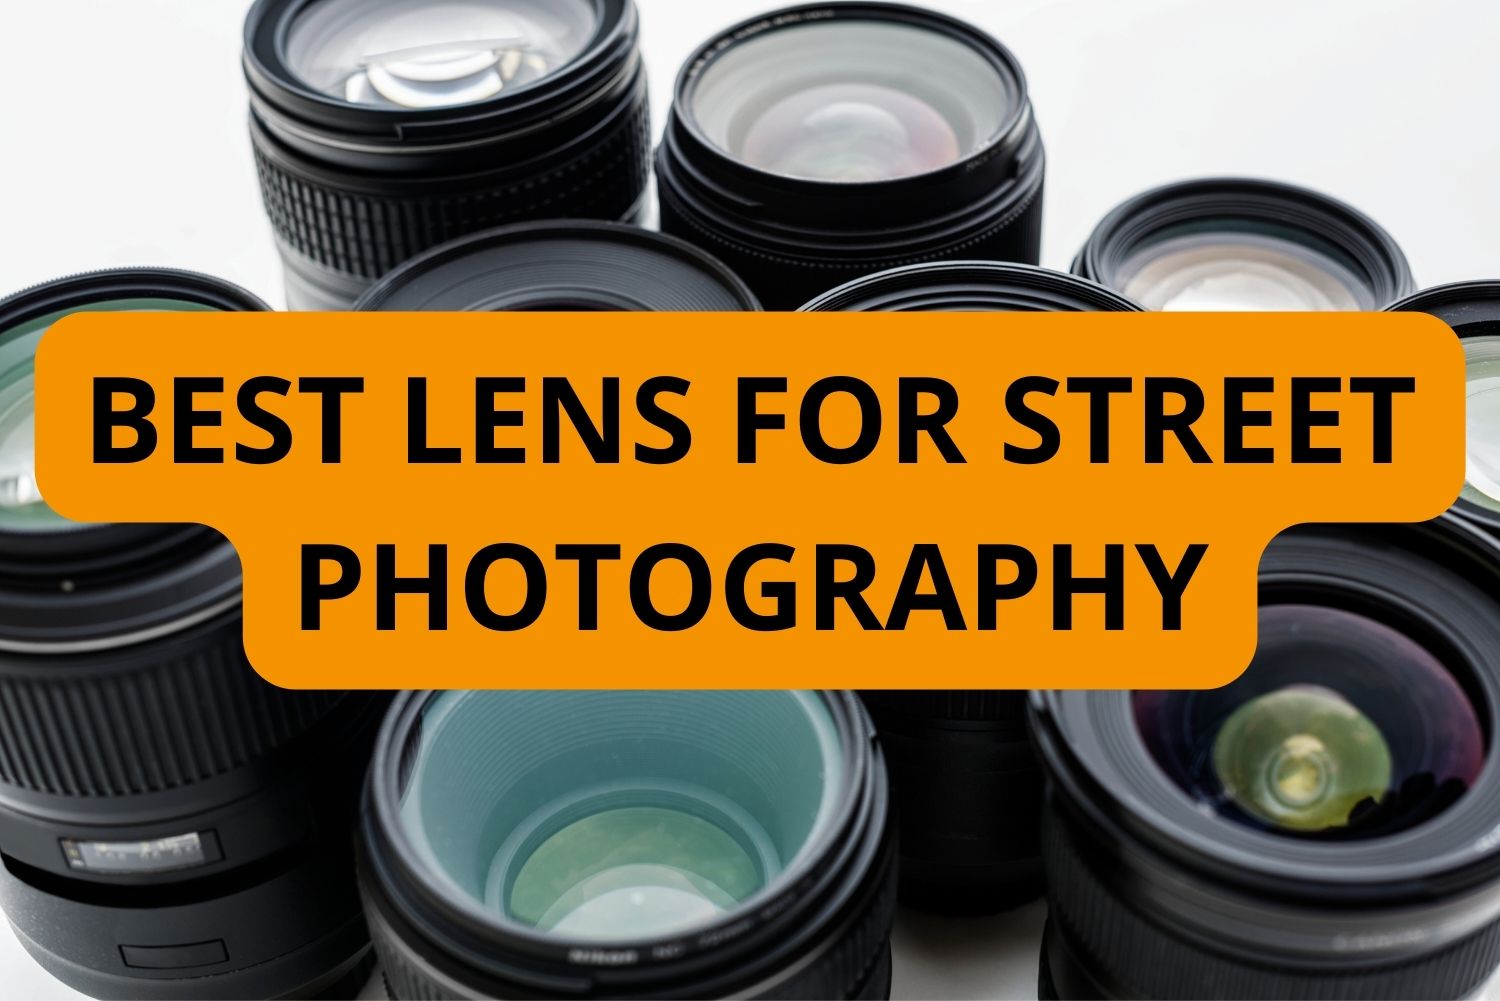 Best camera lens for street photography